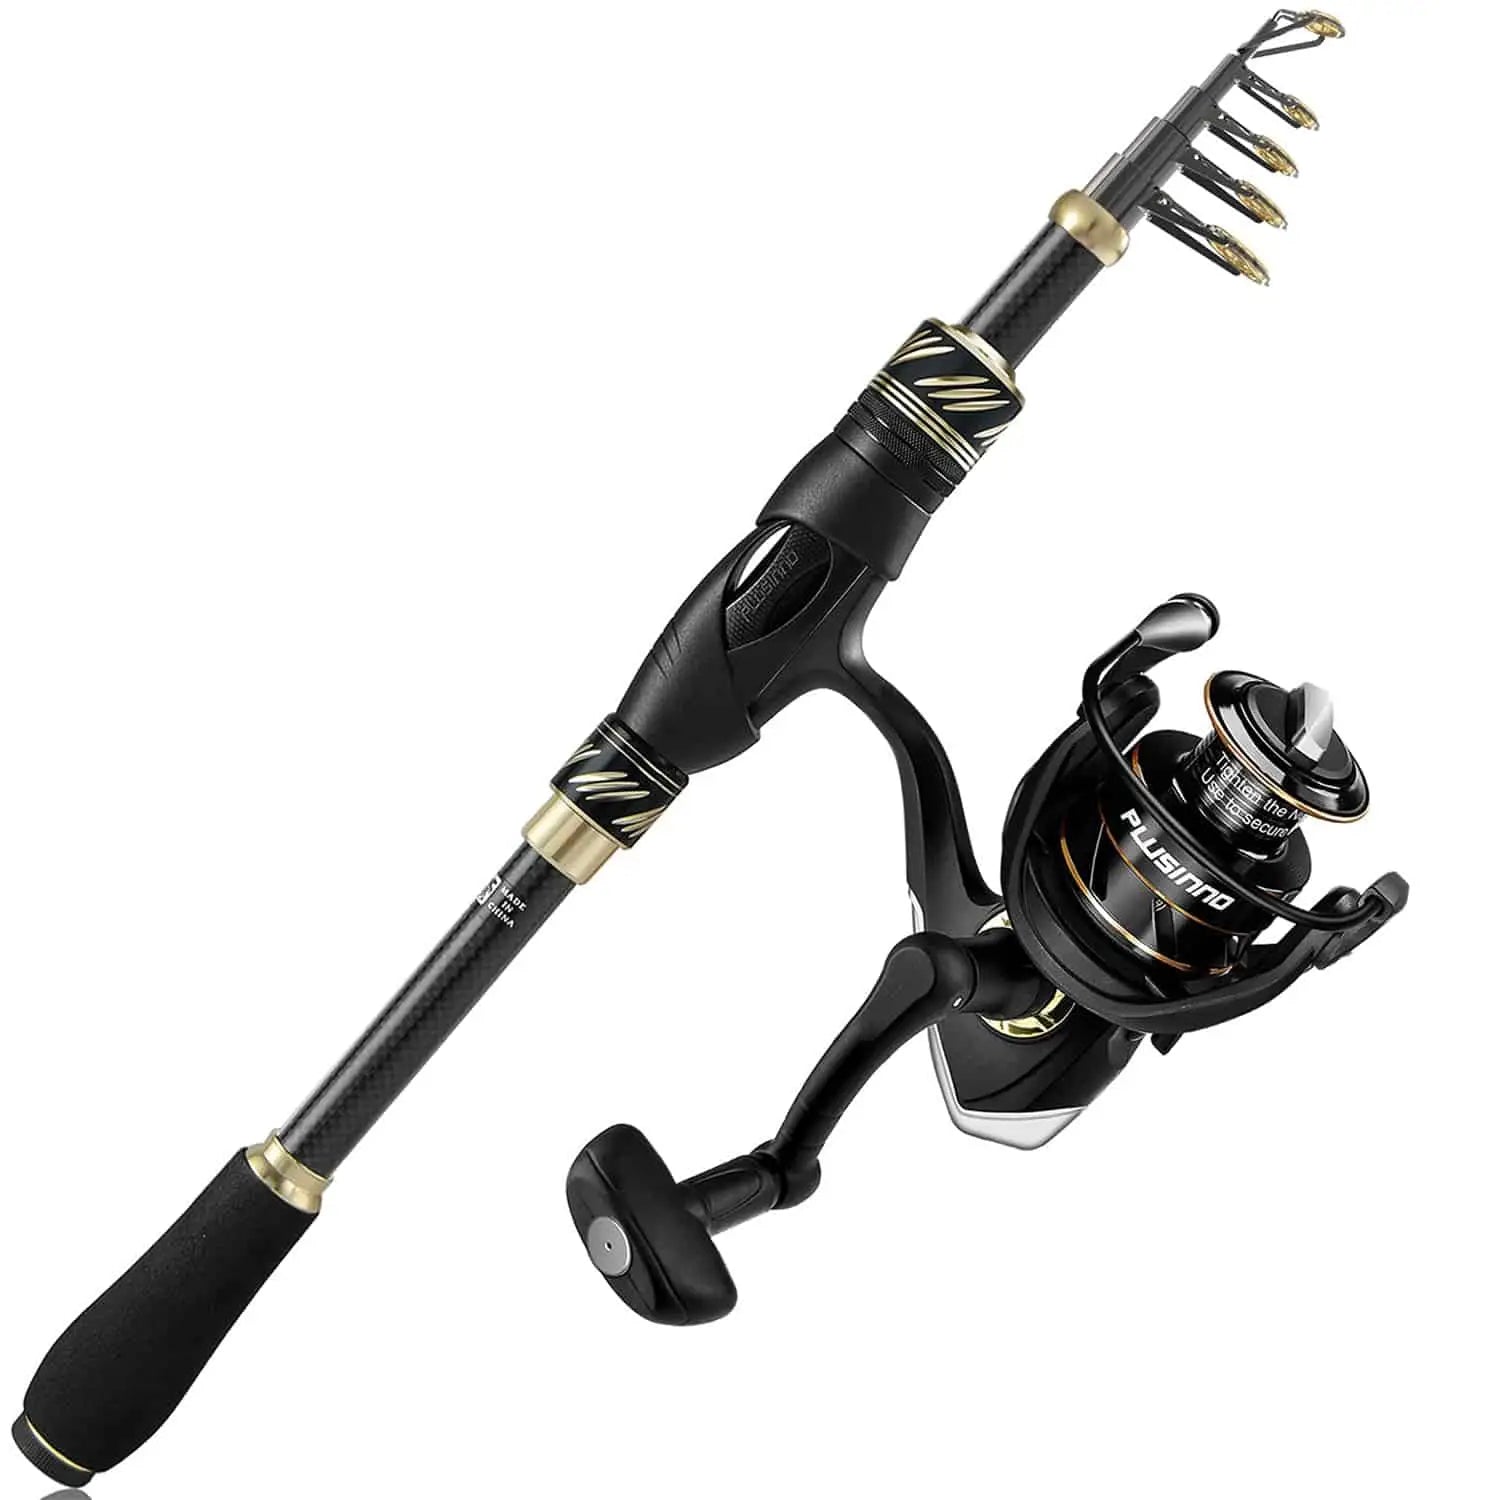 Plusinno PL2000 Fishing Reel : Casting From Beach & Boat 